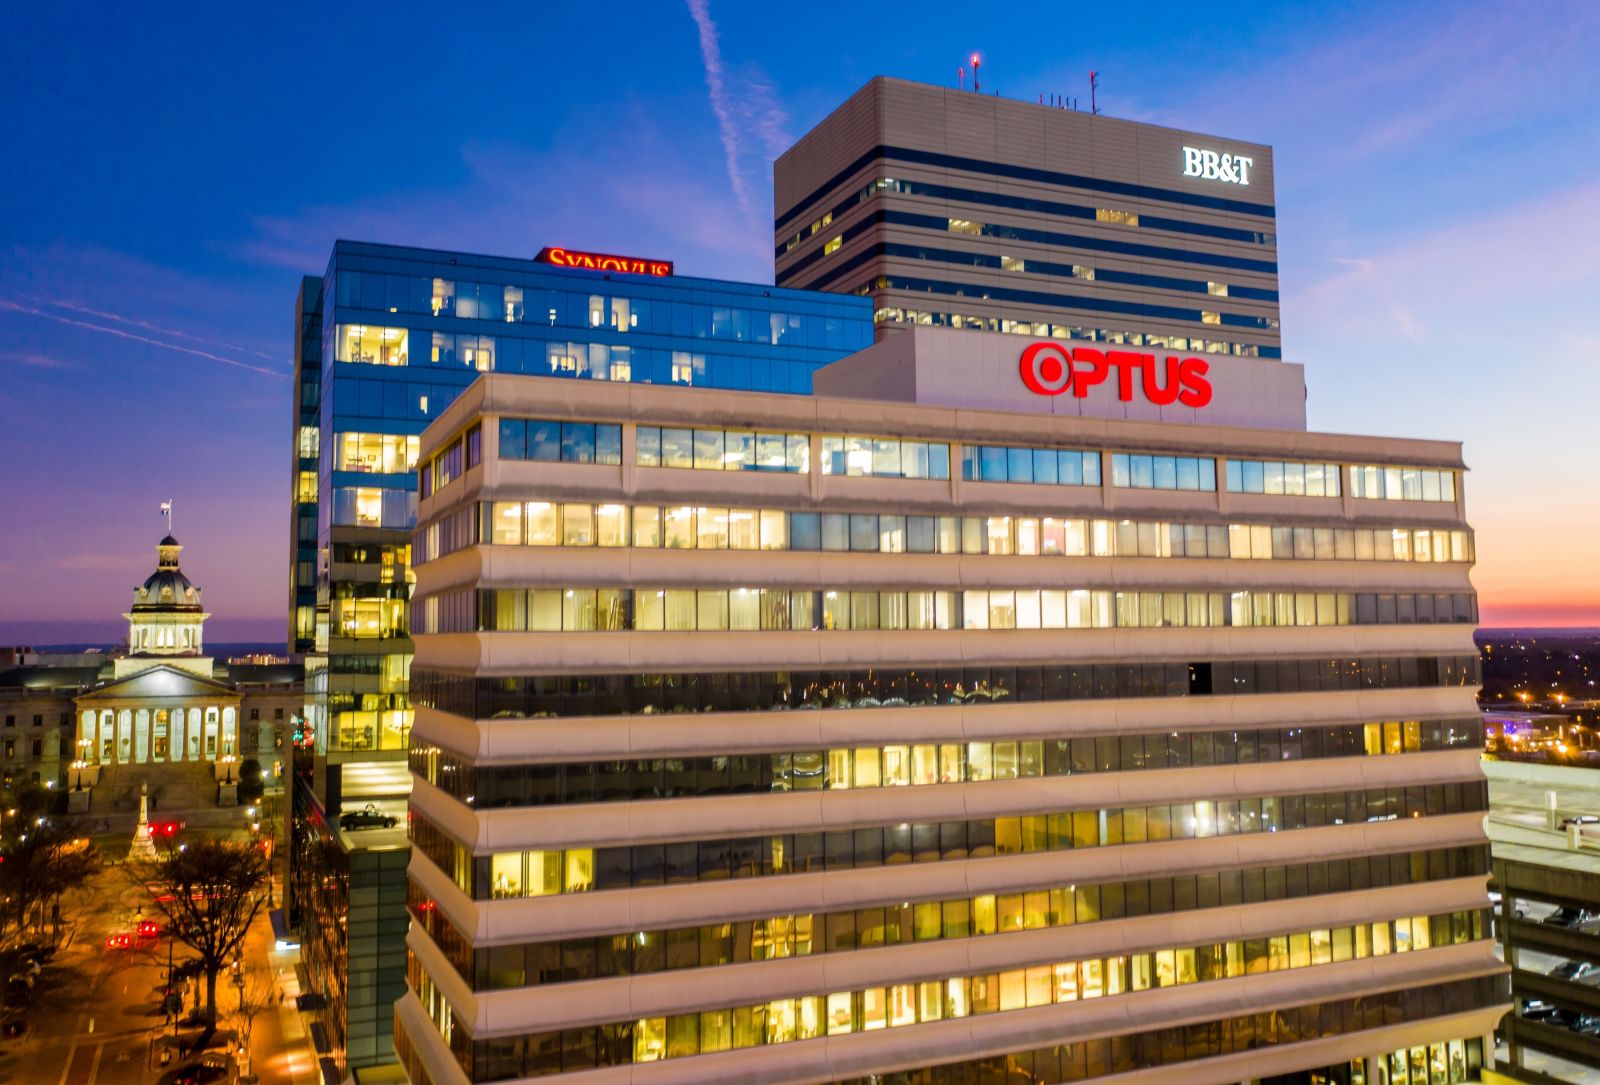 As the second round of PPP loans kicks into high gear, S.C. banks say that while the level of panic has subsided, the need is still great. Columbia's Optus Bank is already processing 600 loans. (Photo/Jeff Blake/JeffBlakePhoto.com)